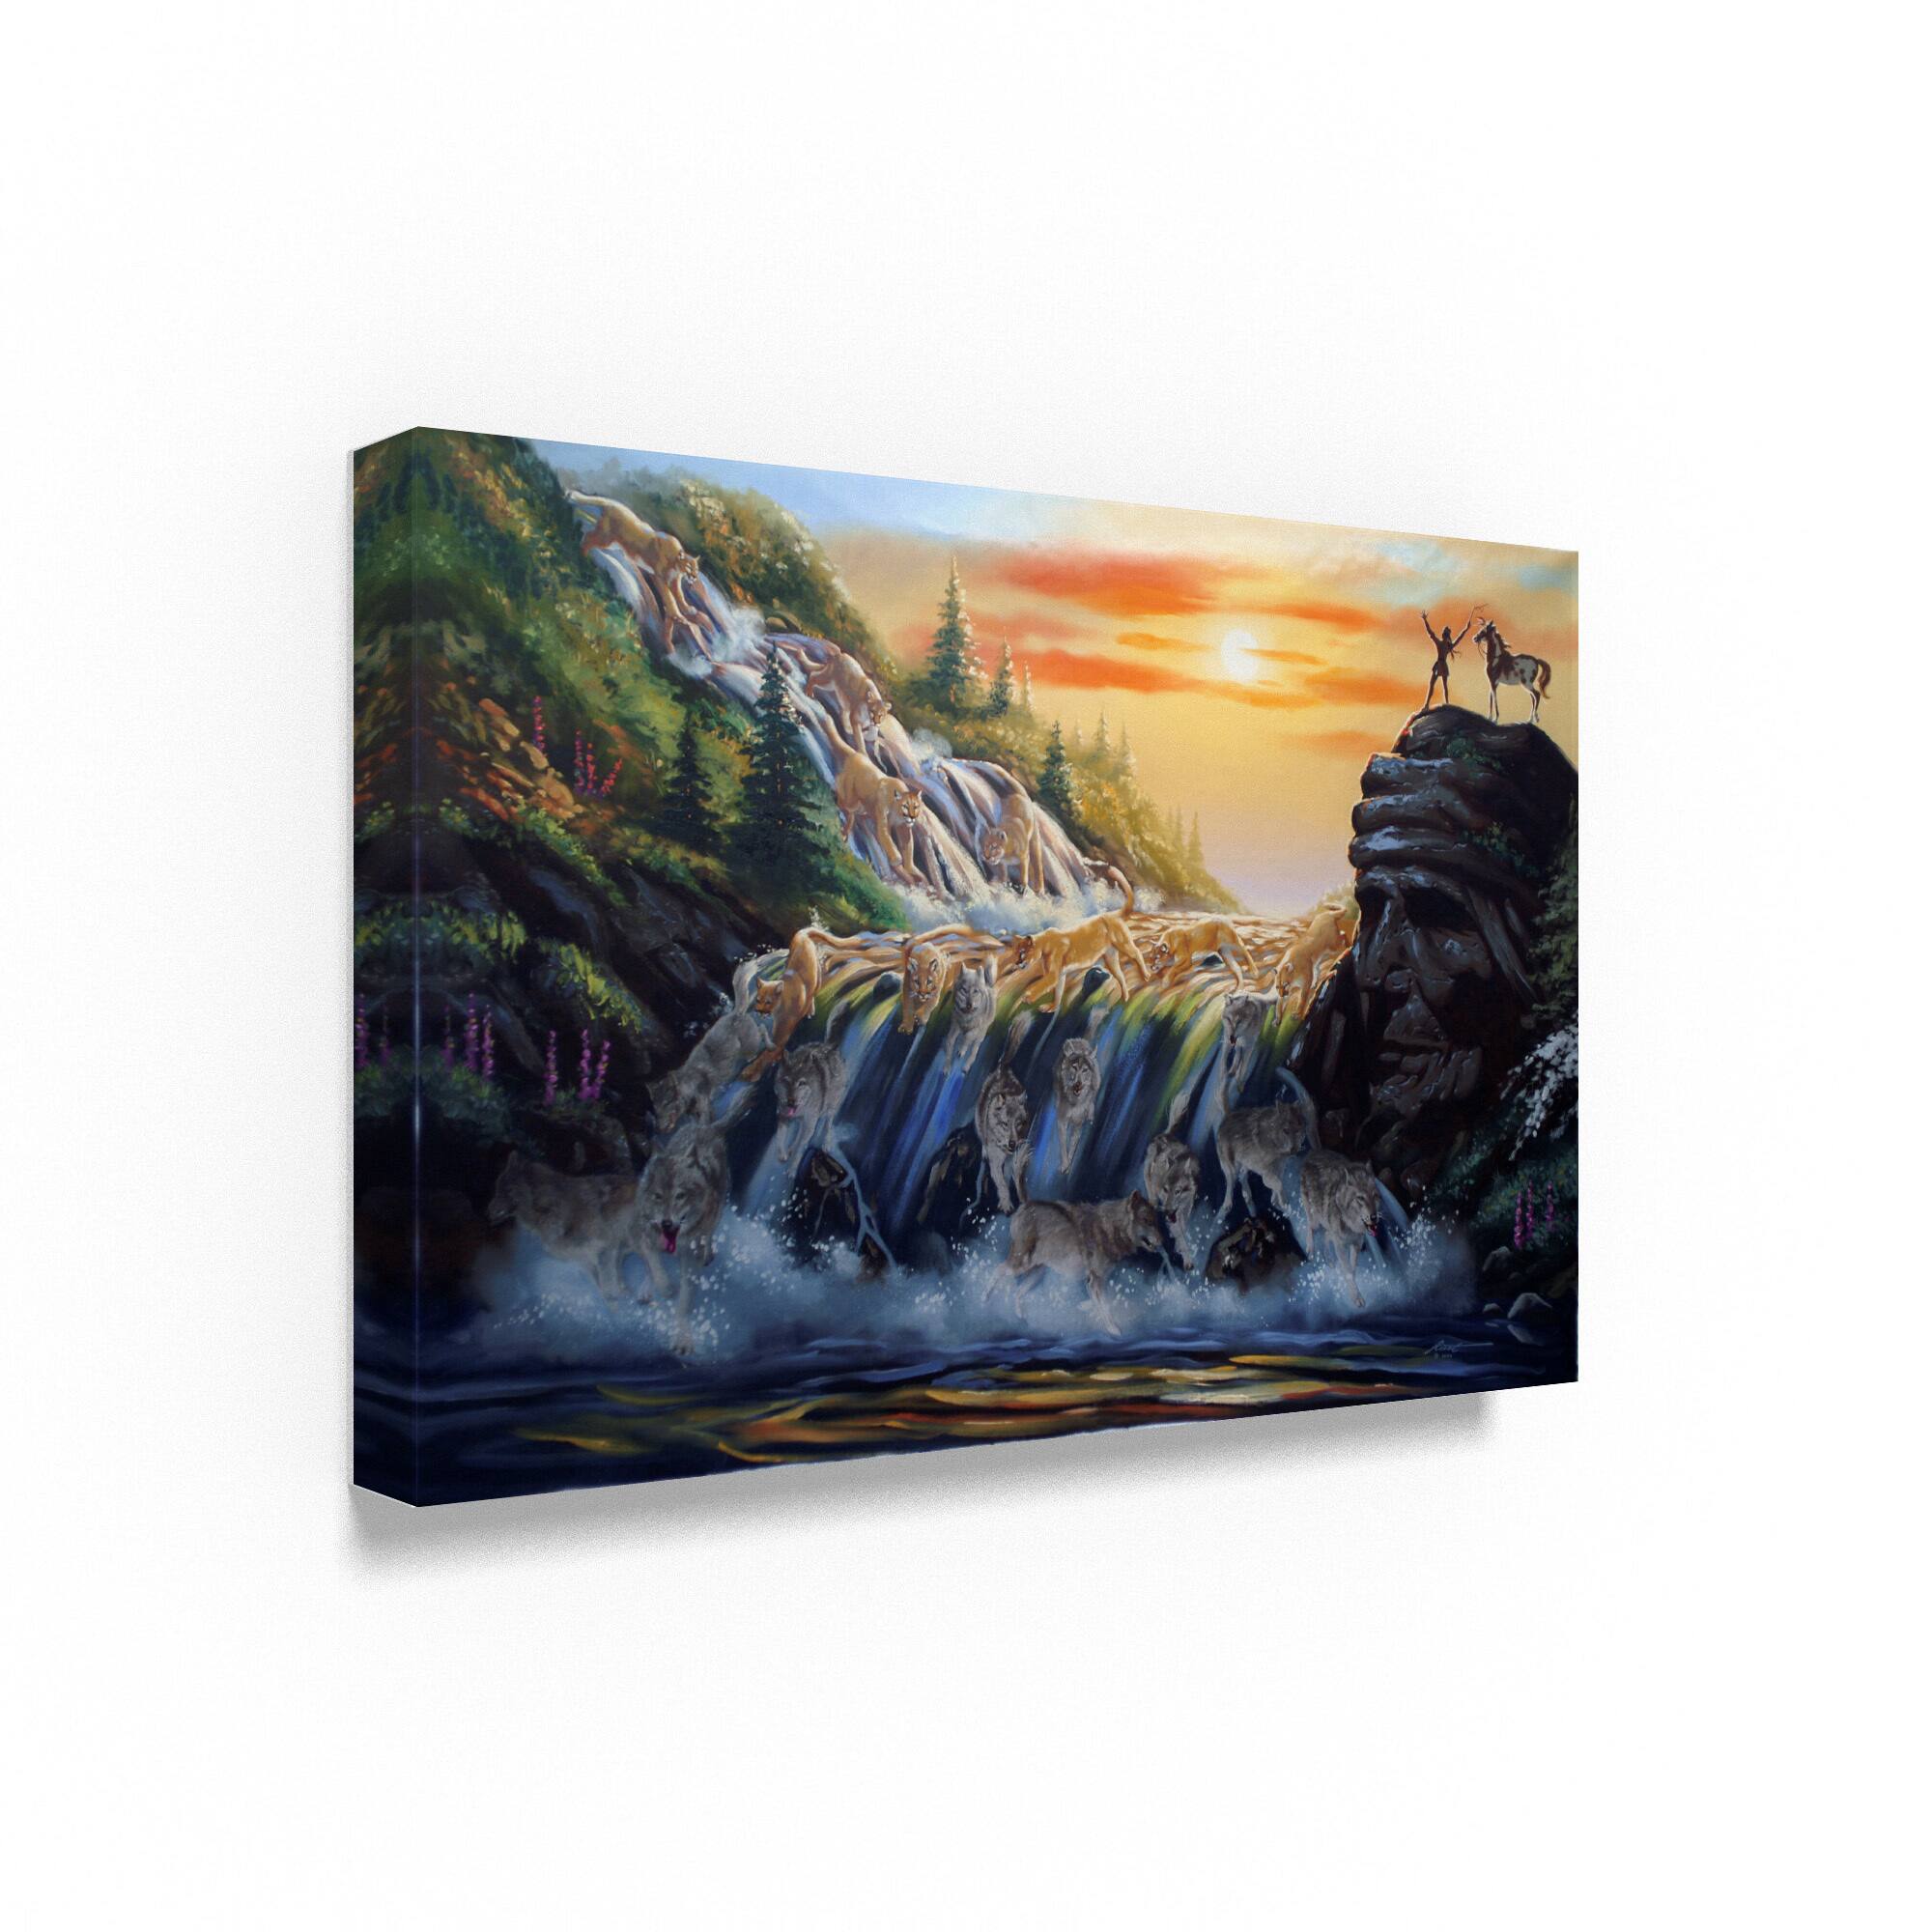 D. Rusty Rust 'The Waterfall' Canvas Art - On Sale - Bed Bath & Beyond ...